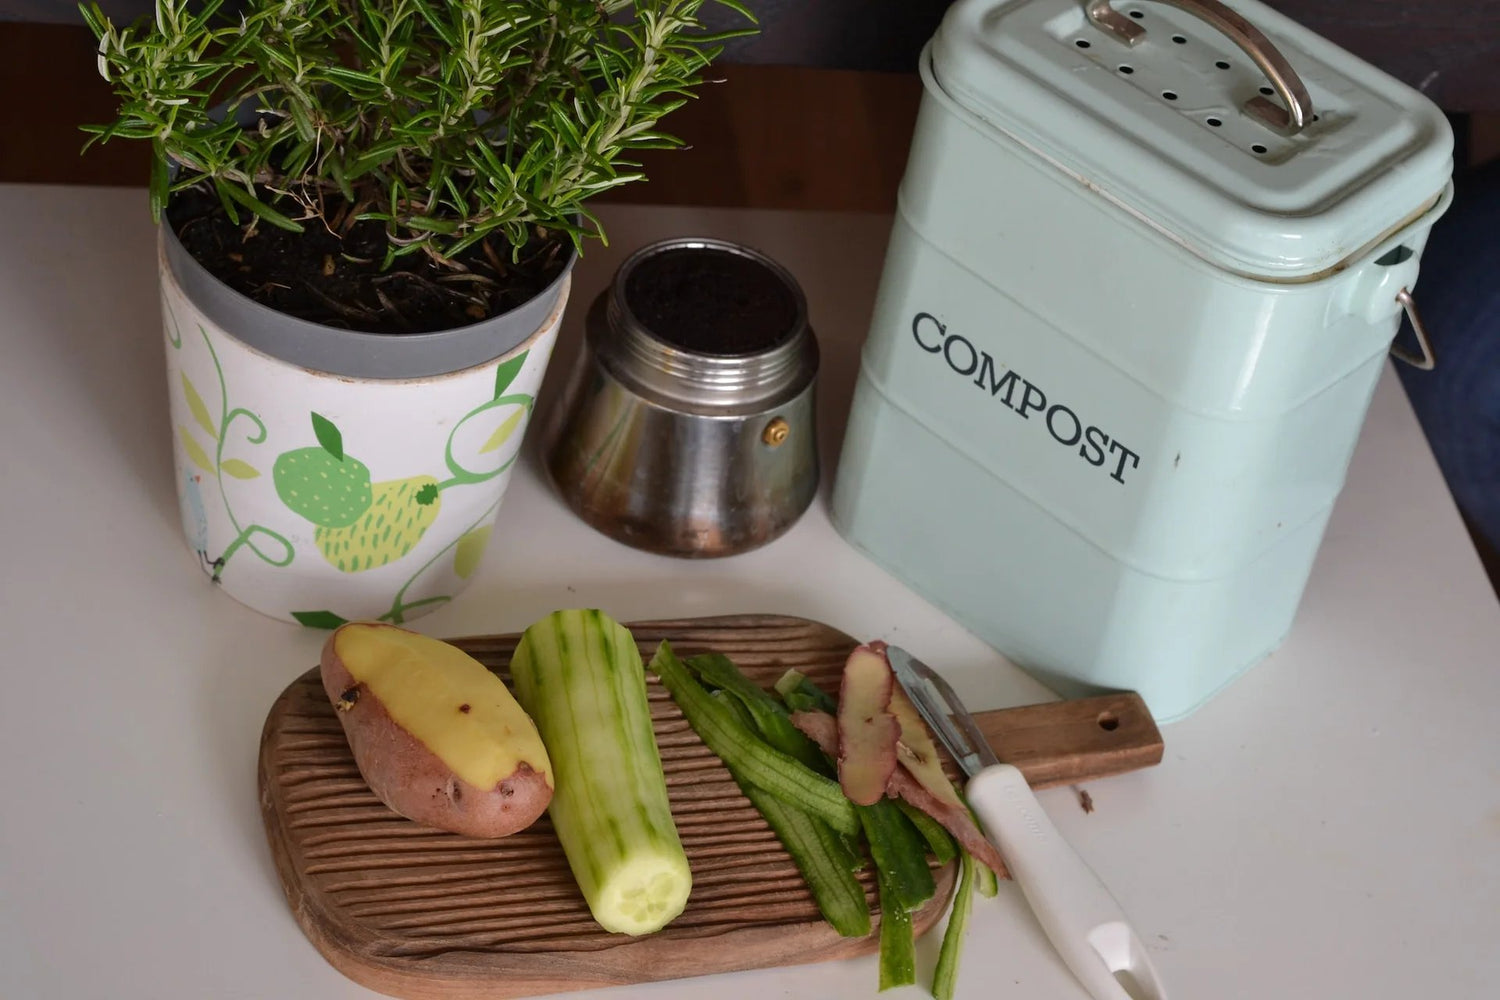 veggies on cutting board with rosemary plant and small compost bin